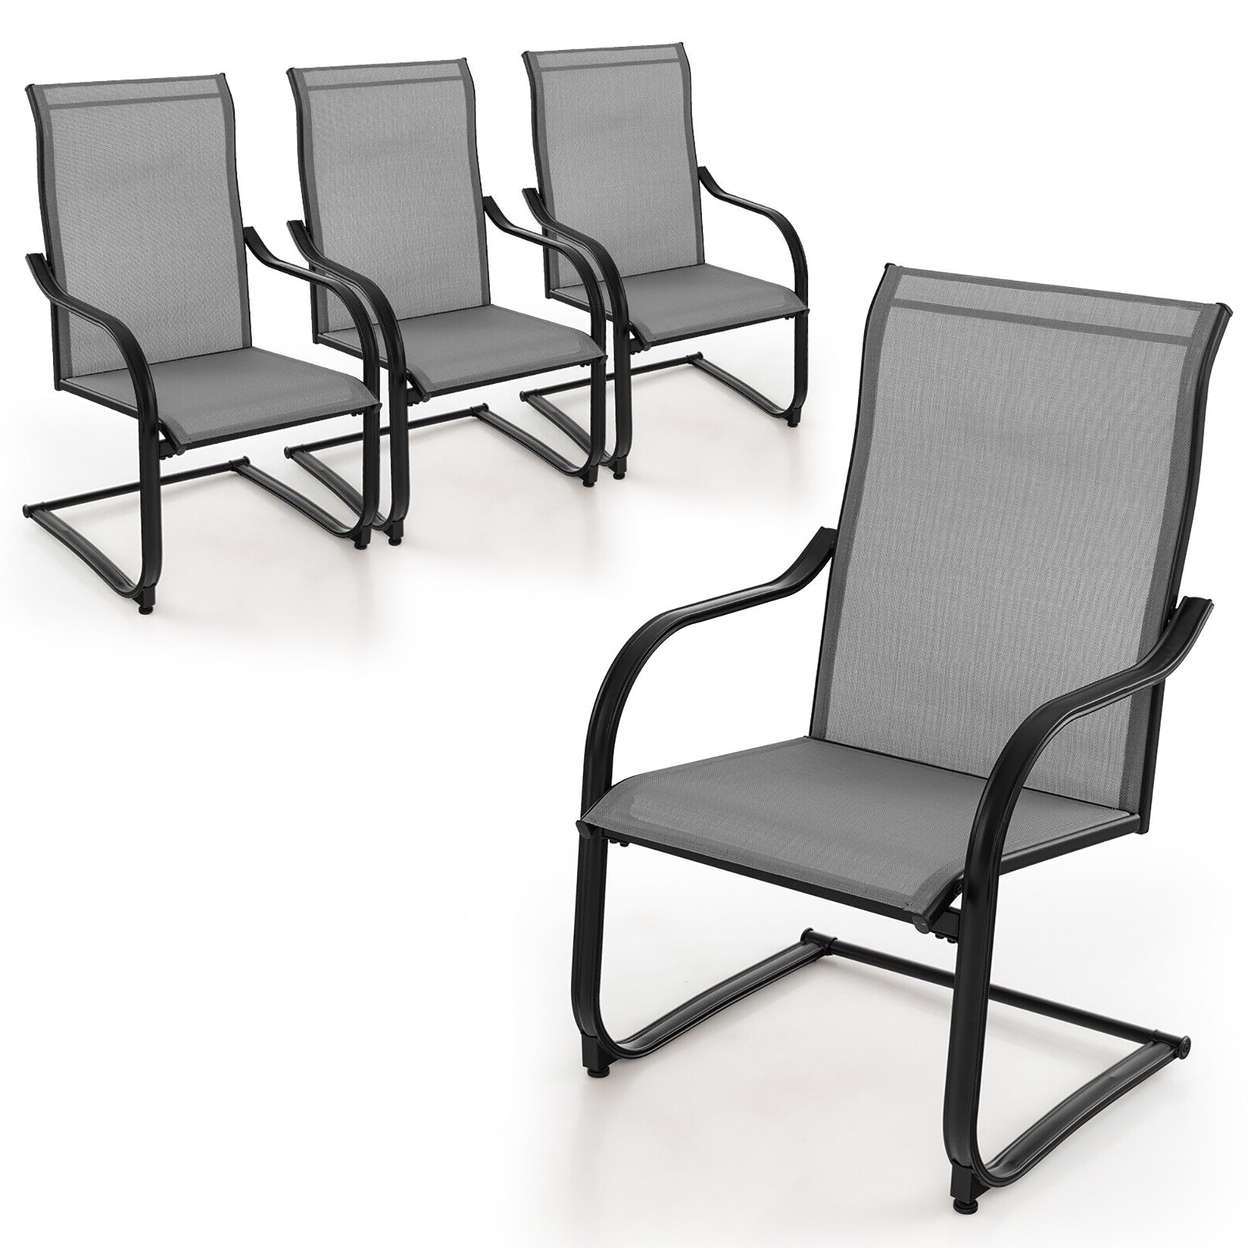 4PCS Outdoor Dining Chairs Patio C-Spring Motion W/ Cozy & Breathable Seat Fabric Gray